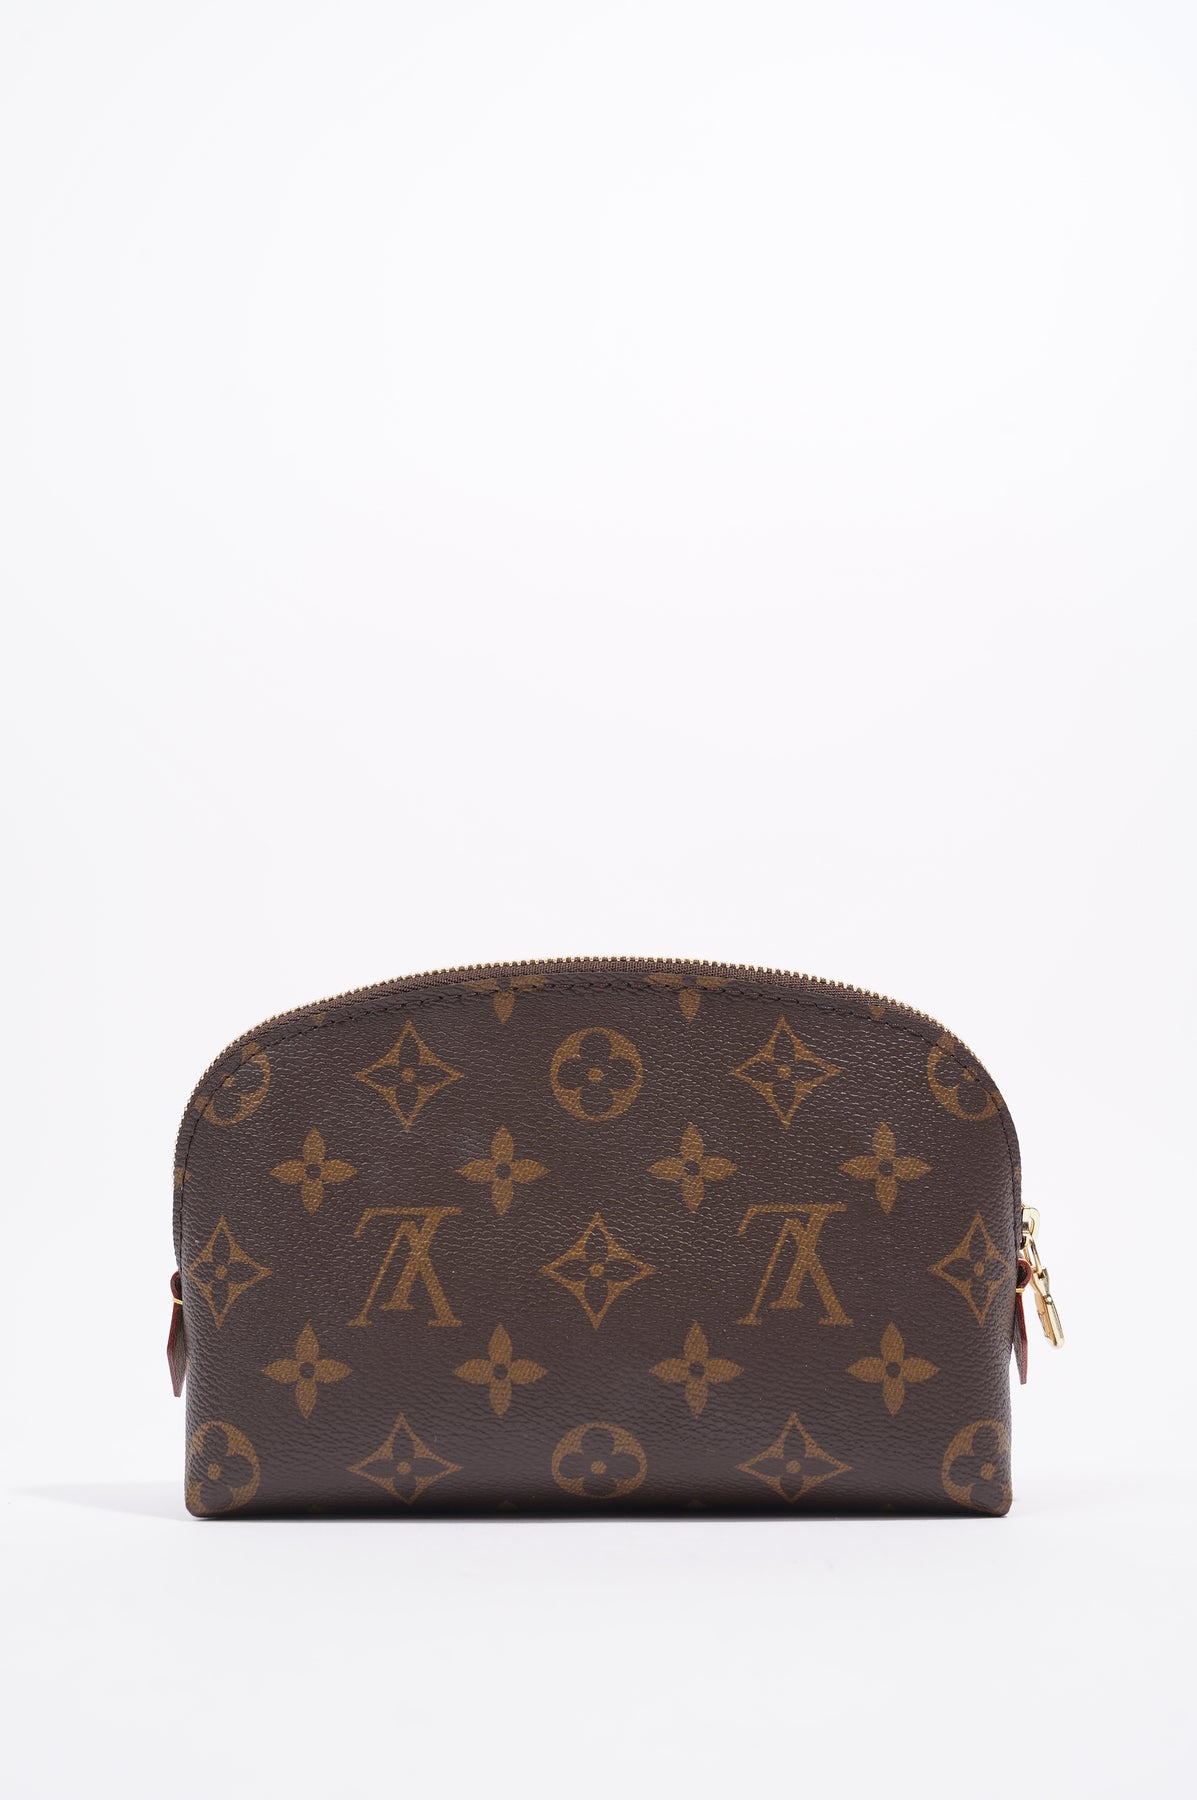 Louis Vuitton, Bags, Bnwt Louis Vuitton Cosmetic Pouch Pm Made In France